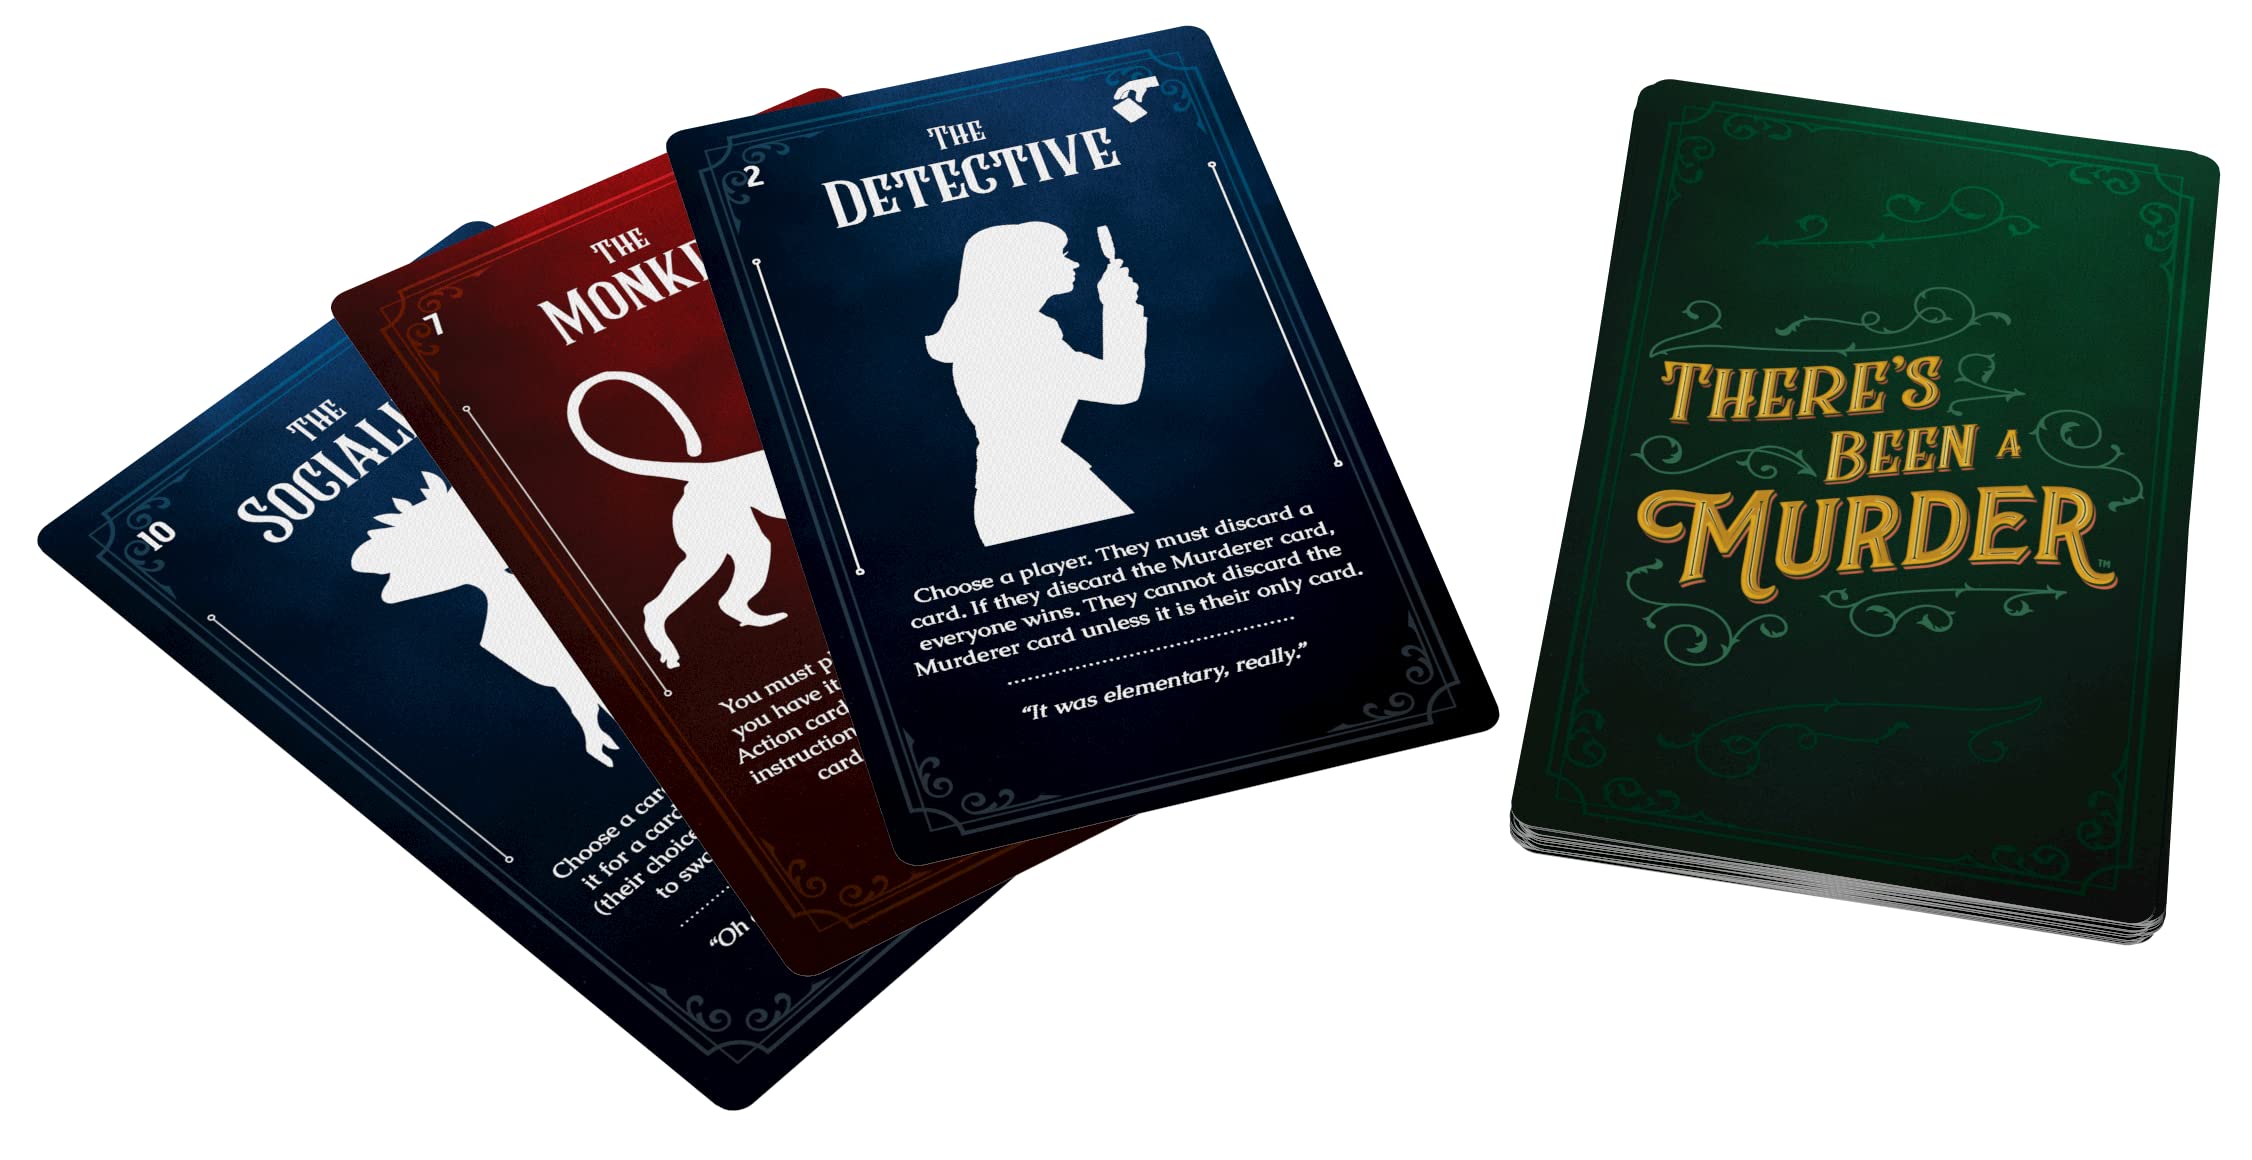 There's Been A Murder - A Collaborative Card Game of Death and Deduction (Packaging May Vary) by Pressman, for Ages 14 and up